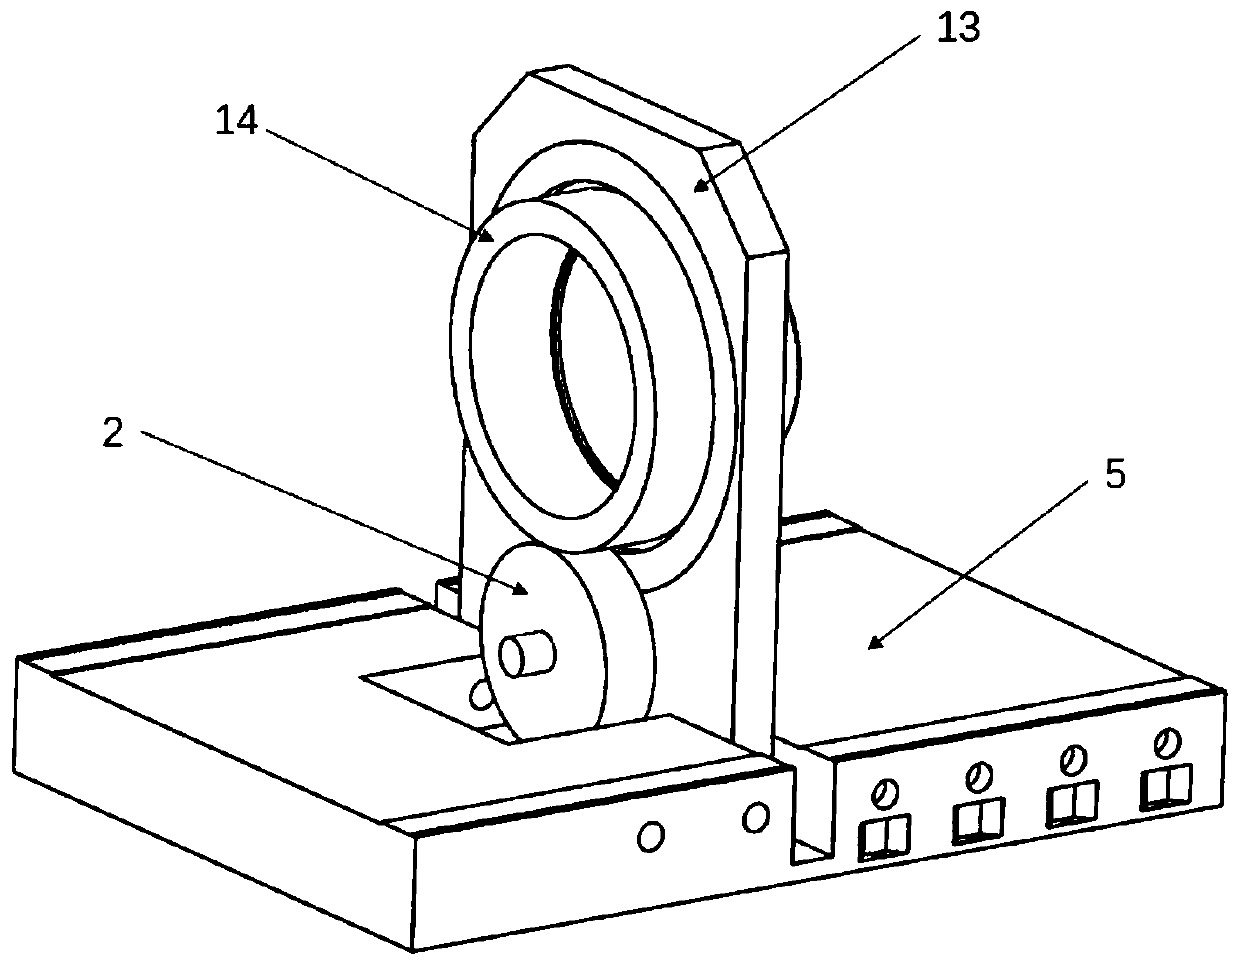 Large-diameter thin-wall sealing structure opposite roller spinning device based on edge constraint